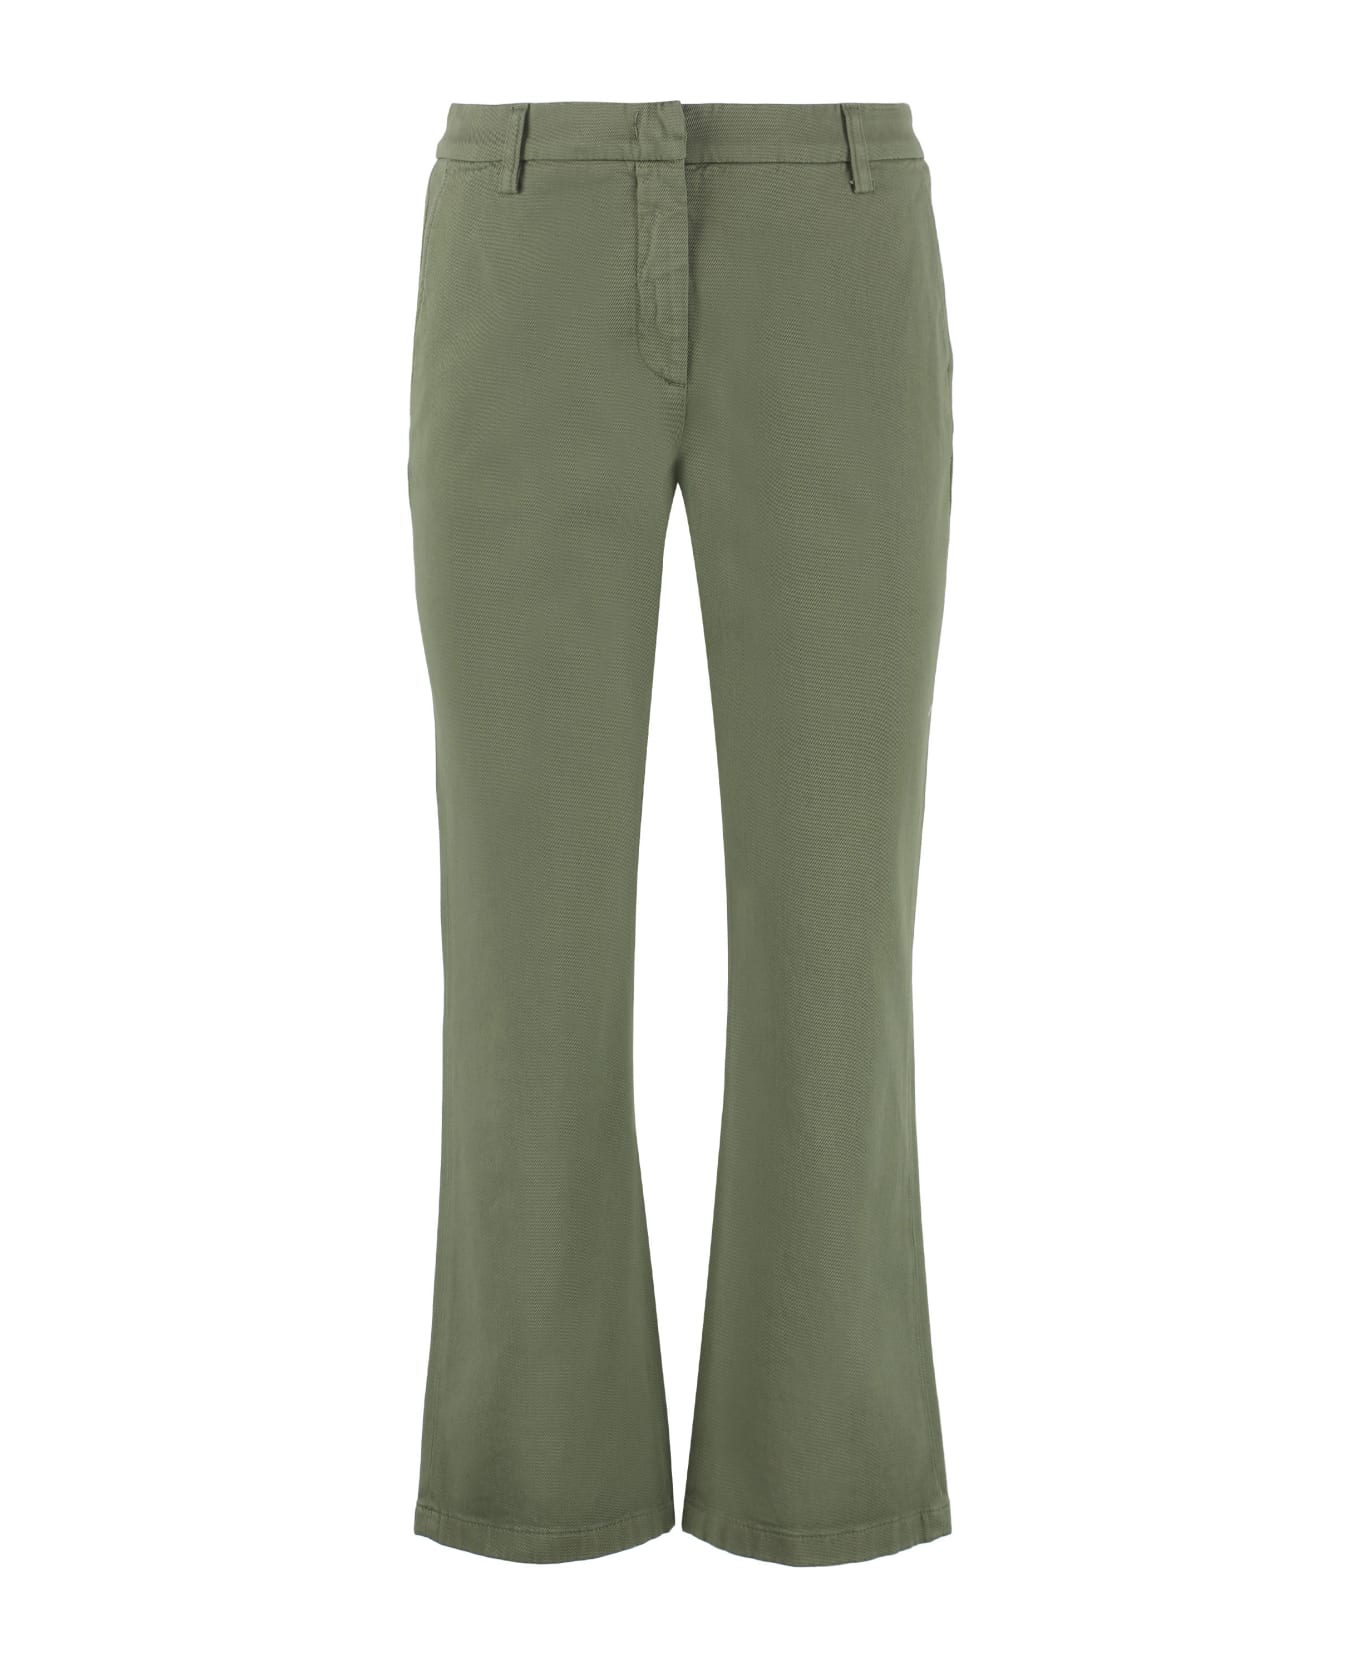 Department Five Jet Stretch Cotton Monogrammmuster Trousers - green